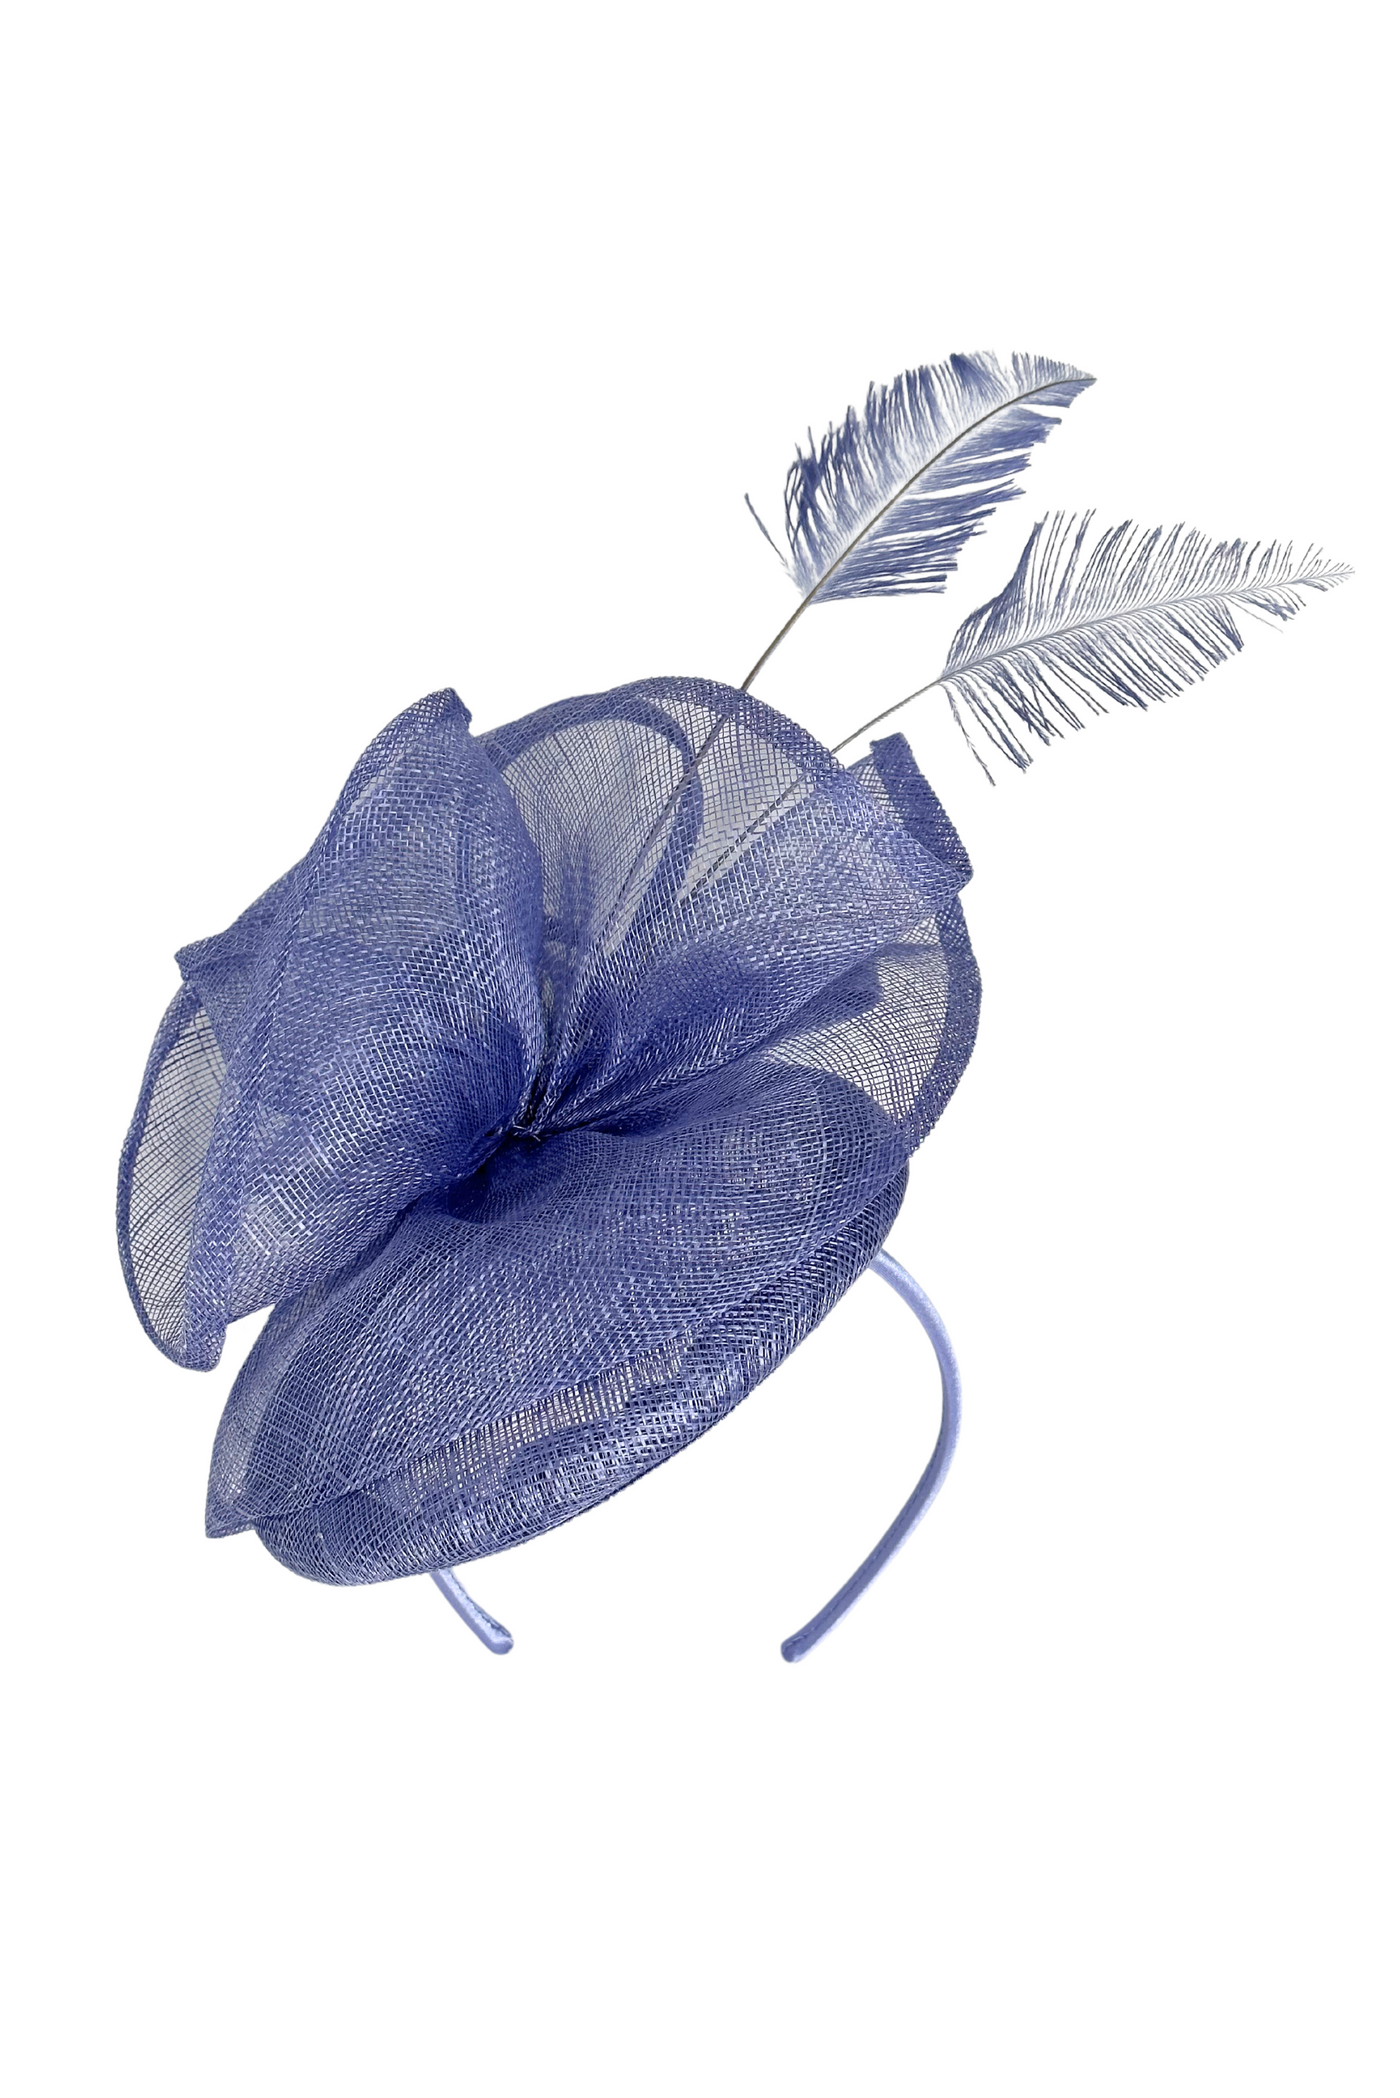 Powder Blue Fascinator with Feathers